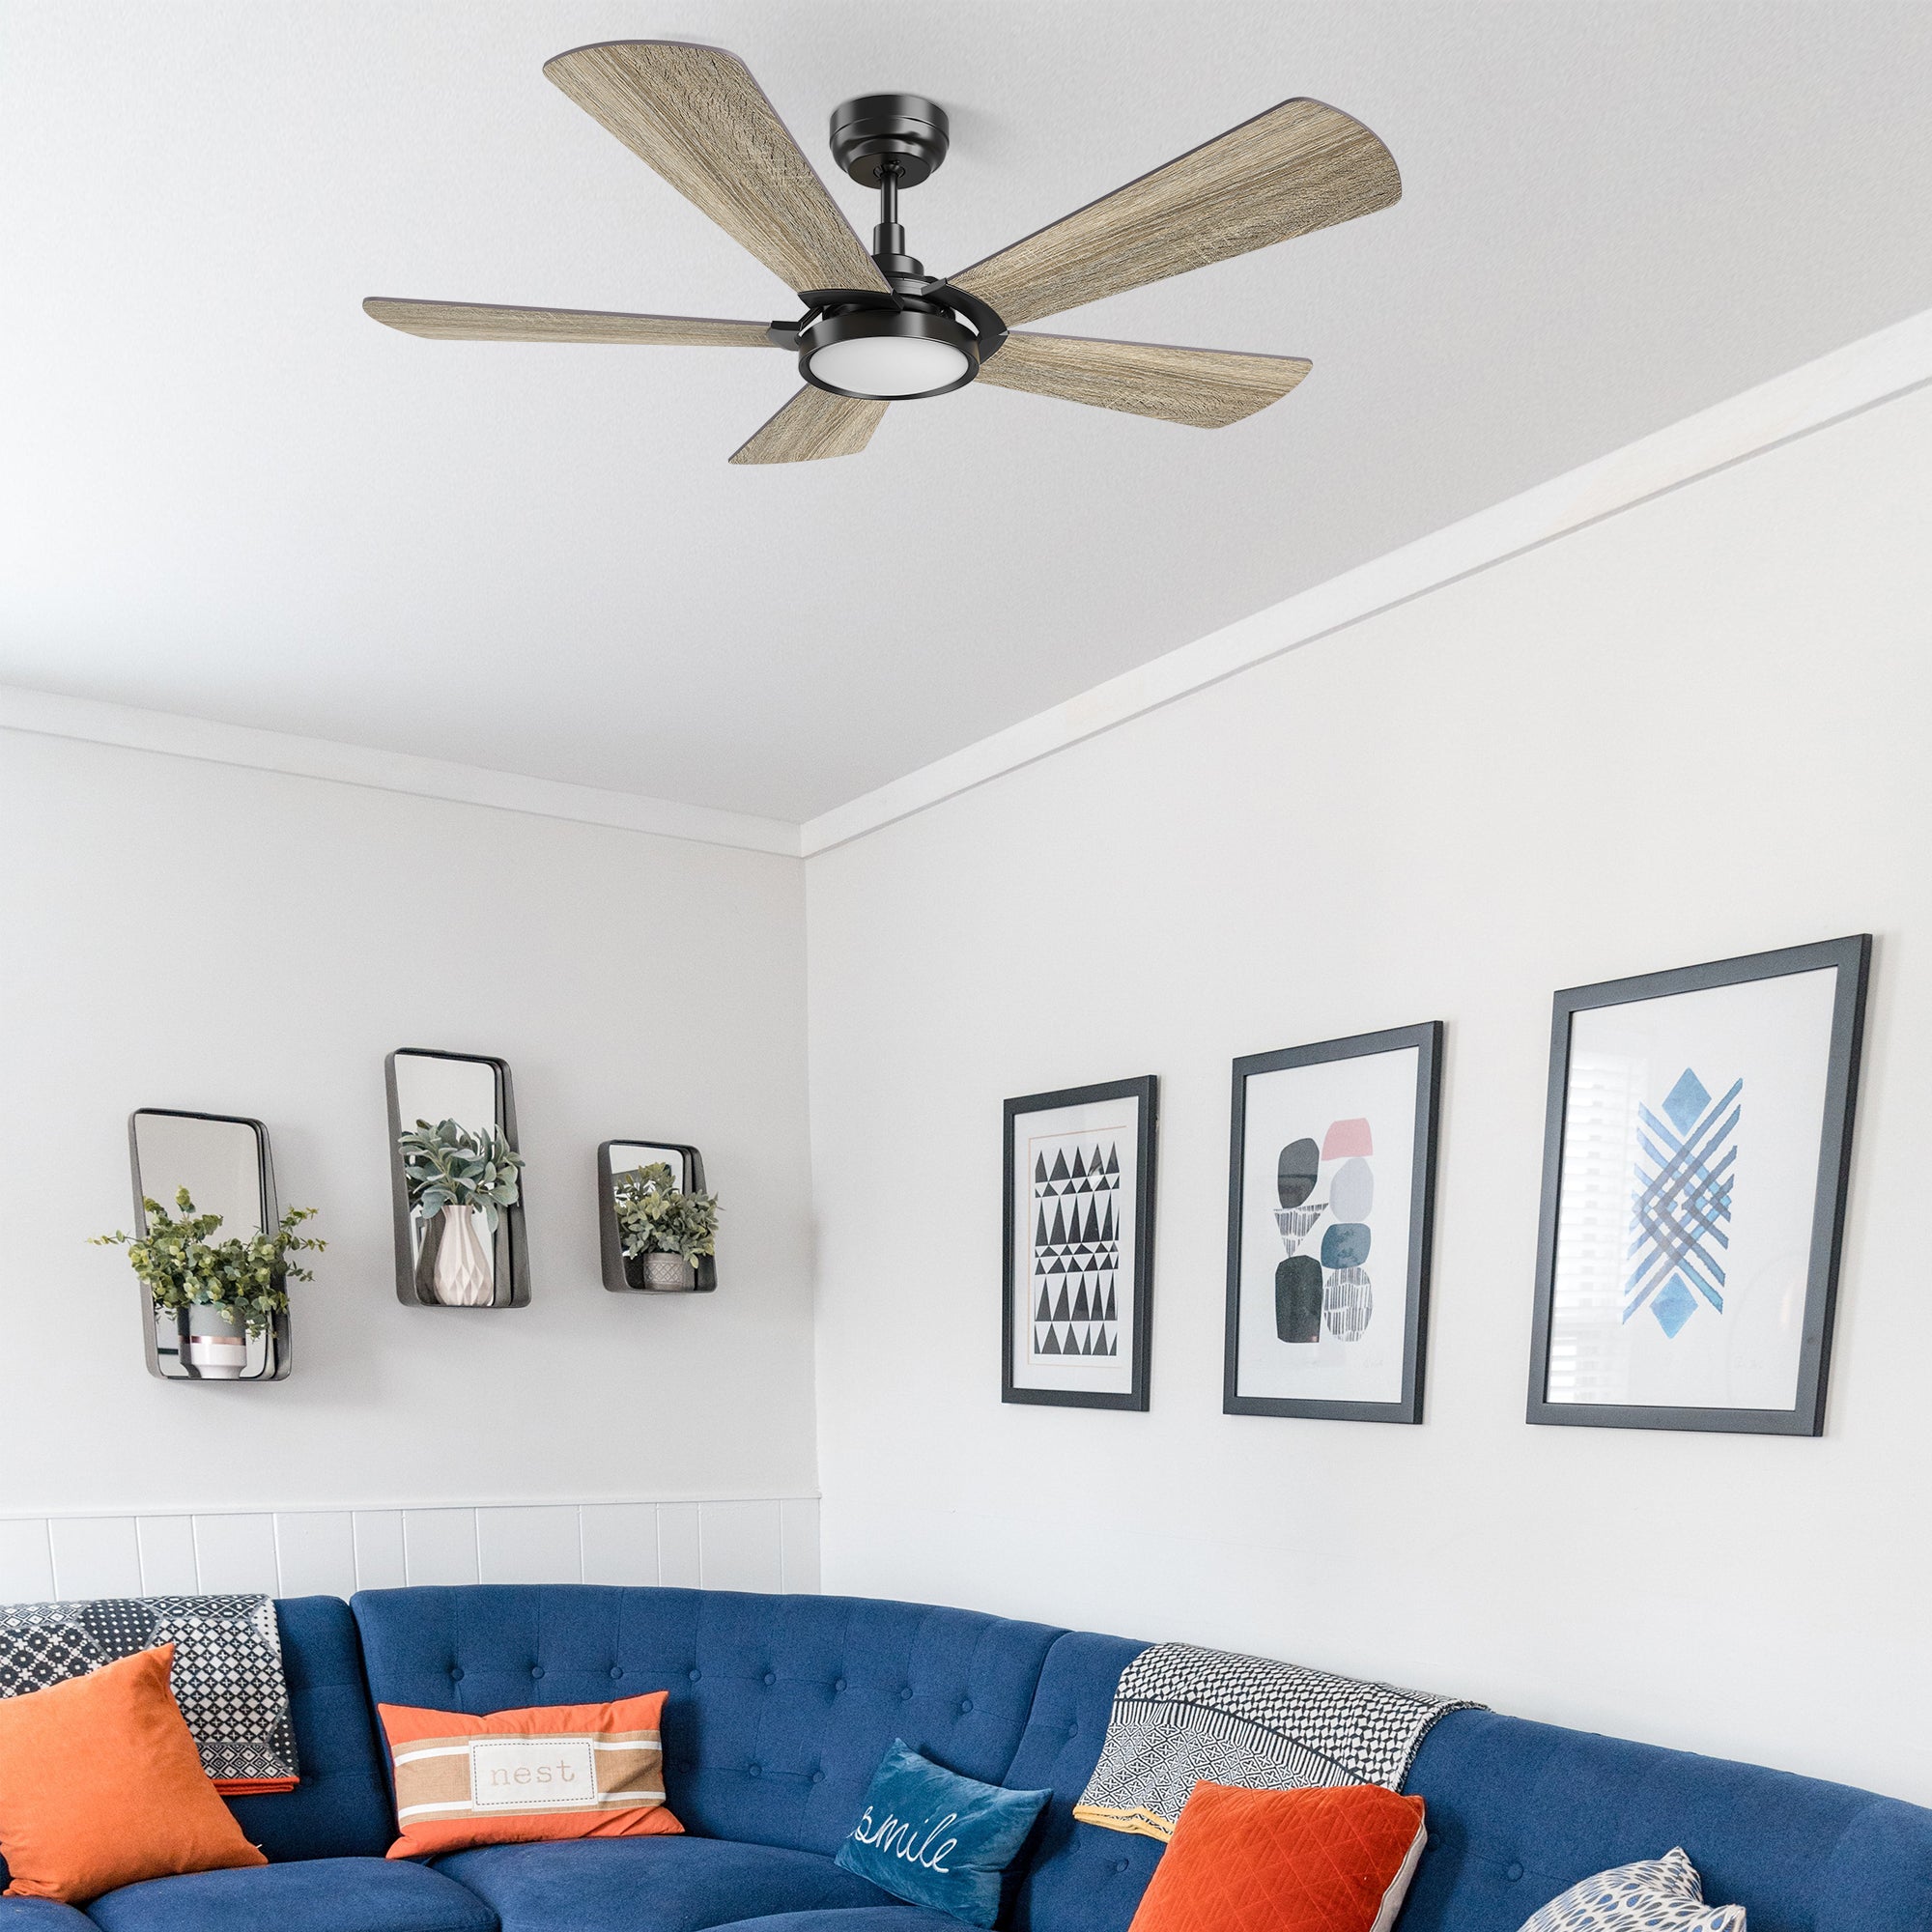 This Wilkes 52&#39;&#39; smart ceiling fan keeps your space cool, bright, and stylish. It is a soft modern masterpiece perfect for your large indoor living spaces. This Wifi smart ceiling fan is a simplicity designing with Black finish, use elegant Plywood blades, Glass shade and has an integrated 4000K LED cool light. The fan features Remote control, Wi-Fi apps, Siri Shortcut and Voice control technology (compatible with Amazon Alexa and Google Home Assistant ) to set fan preferences.